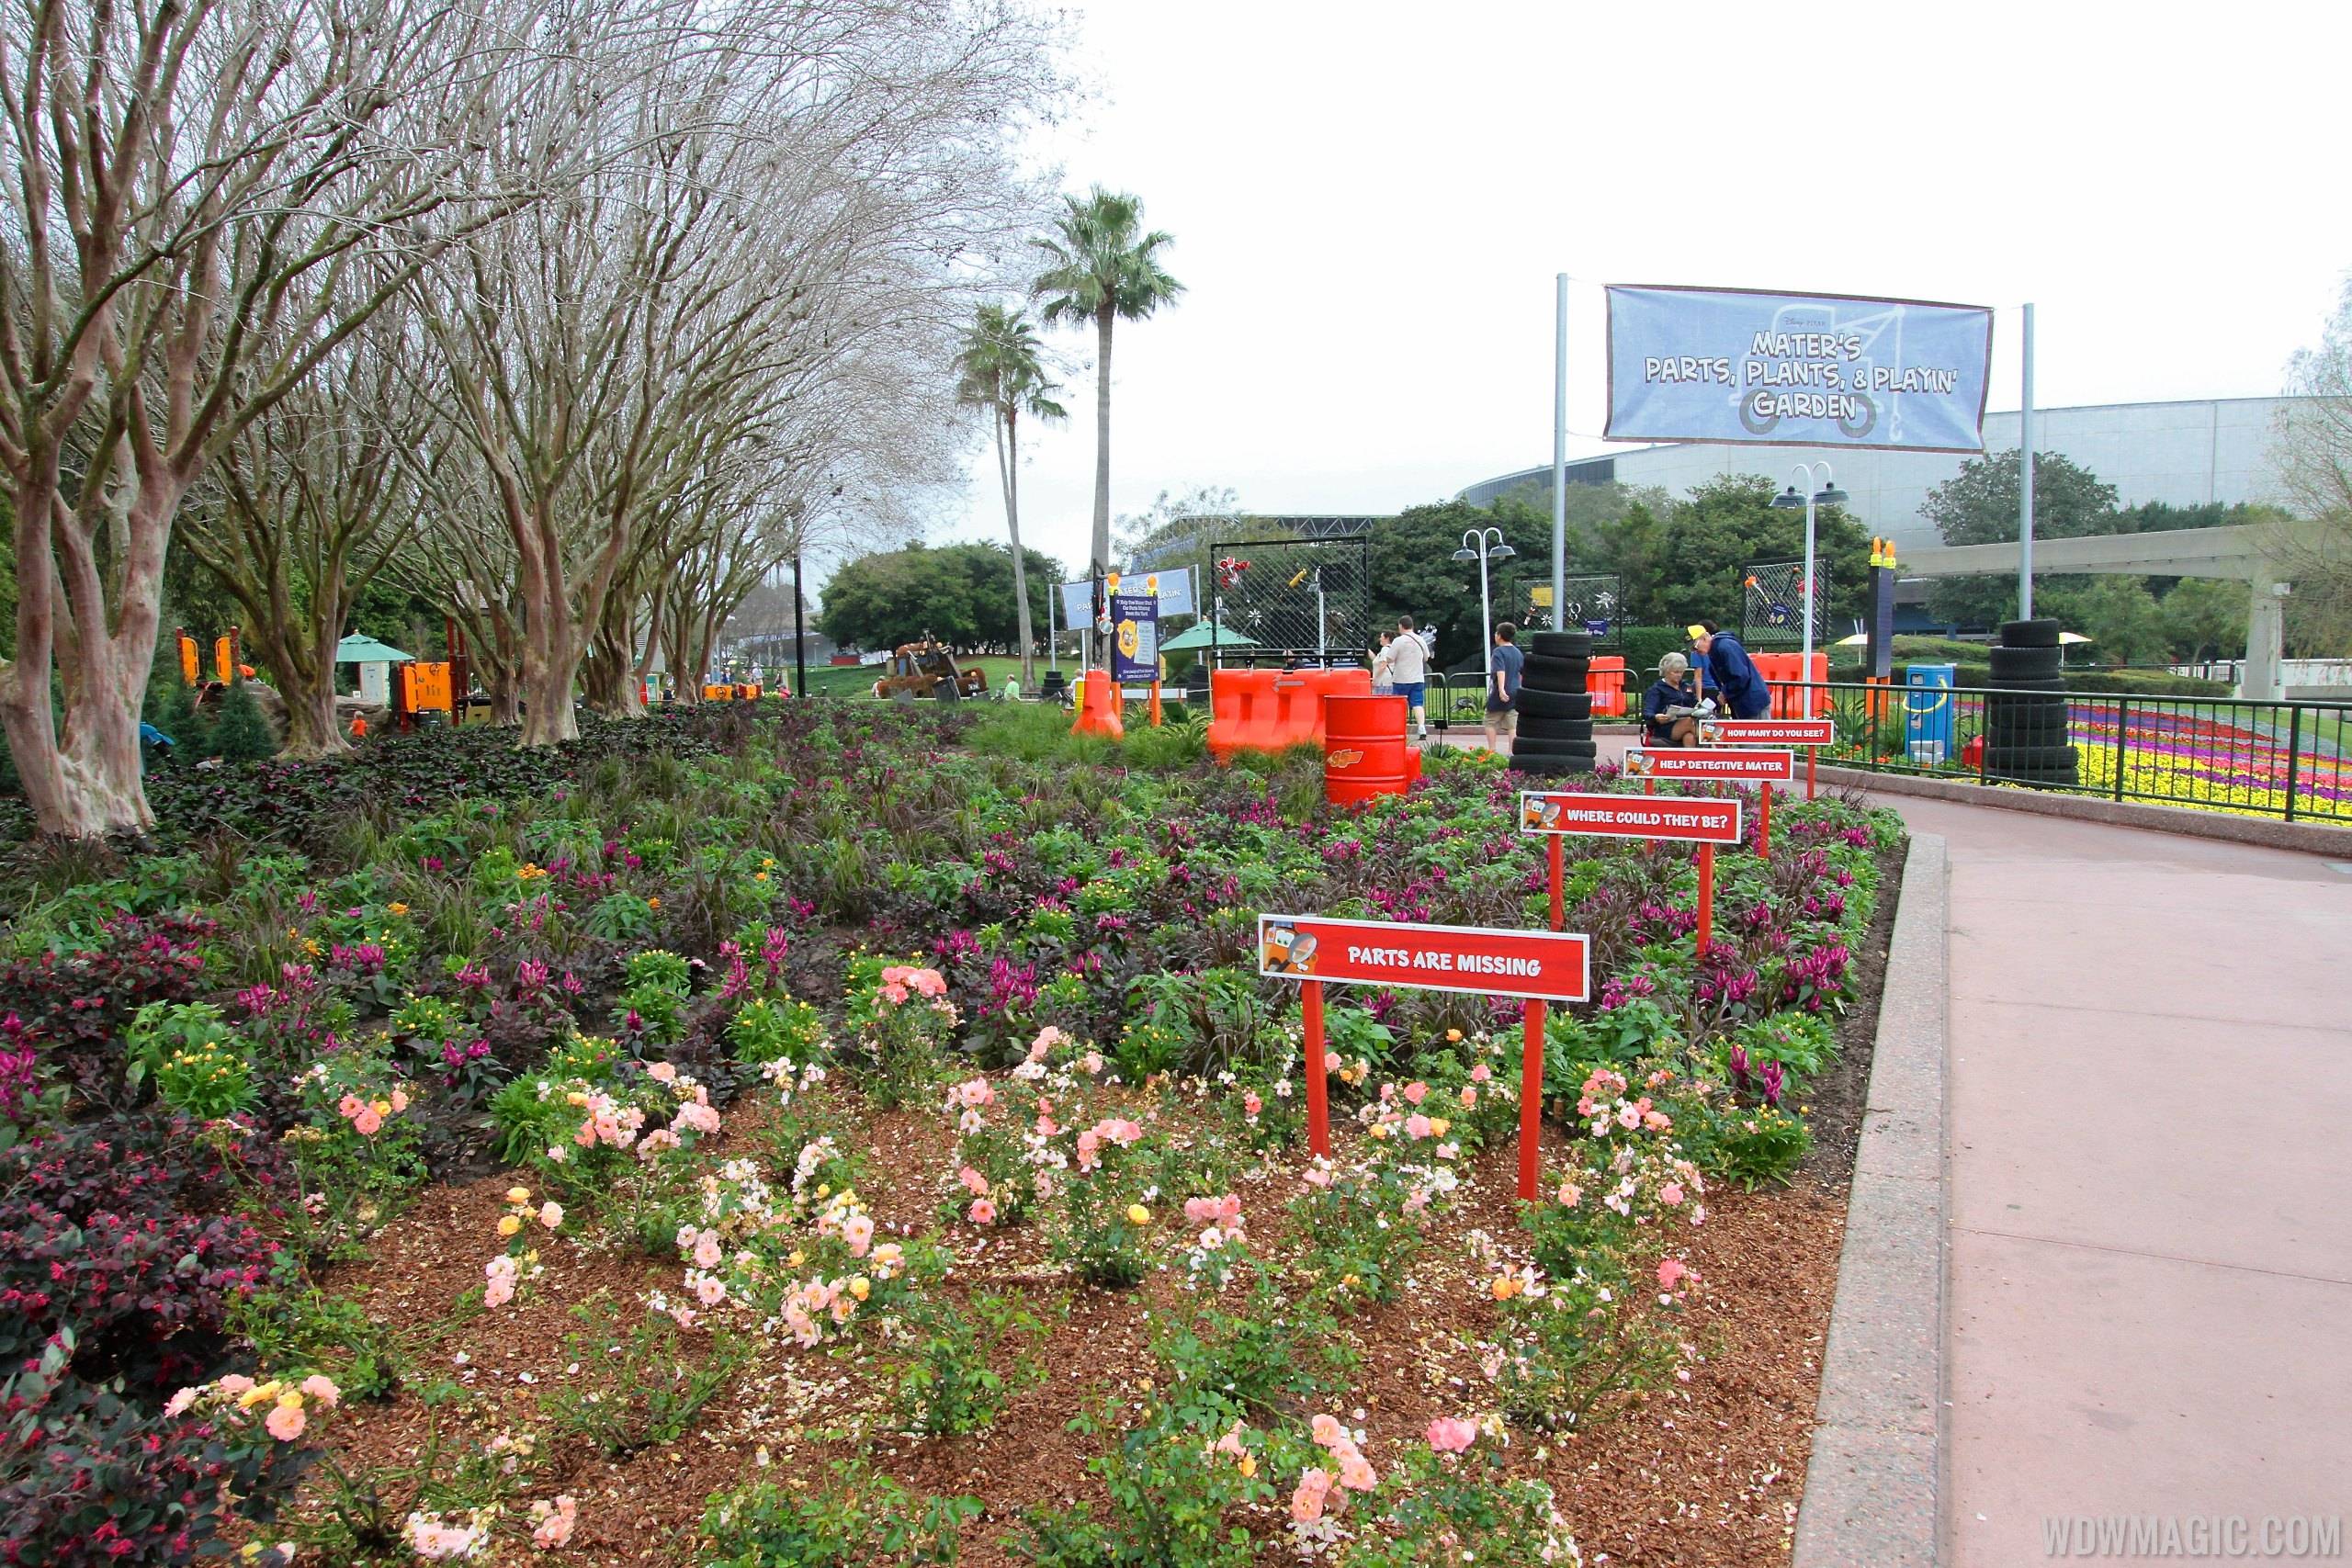 2014 Epcot Flower and Garden Festival - Mater's Parts, Plants and Playin' garden